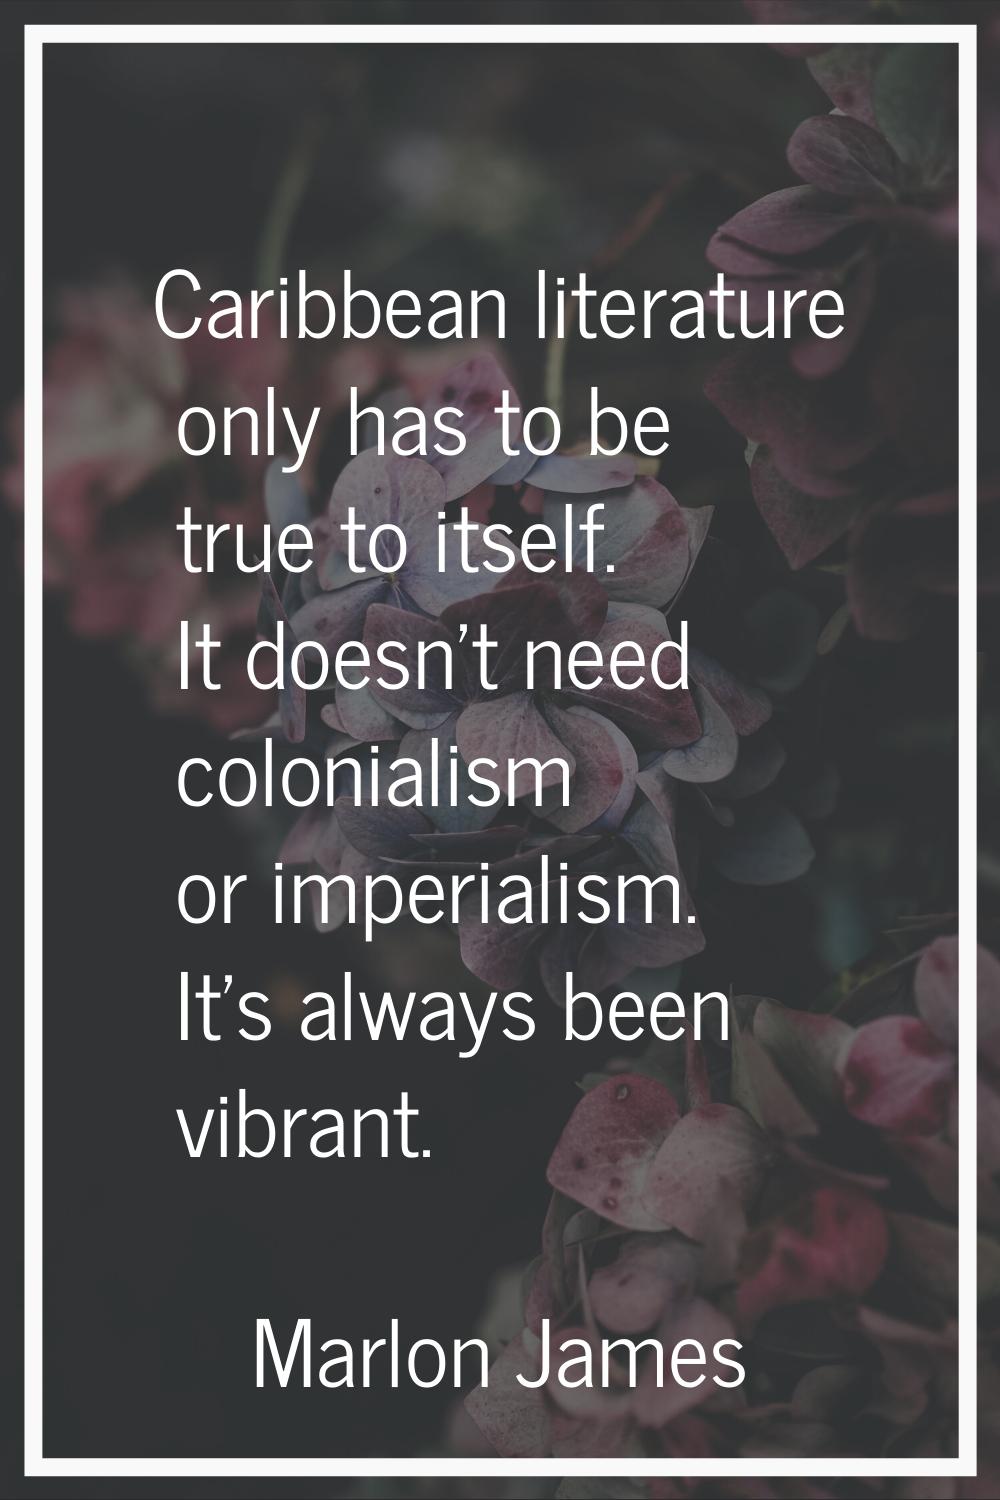 Caribbean literature only has to be true to itself. It doesn't need colonialism or imperialism. It'